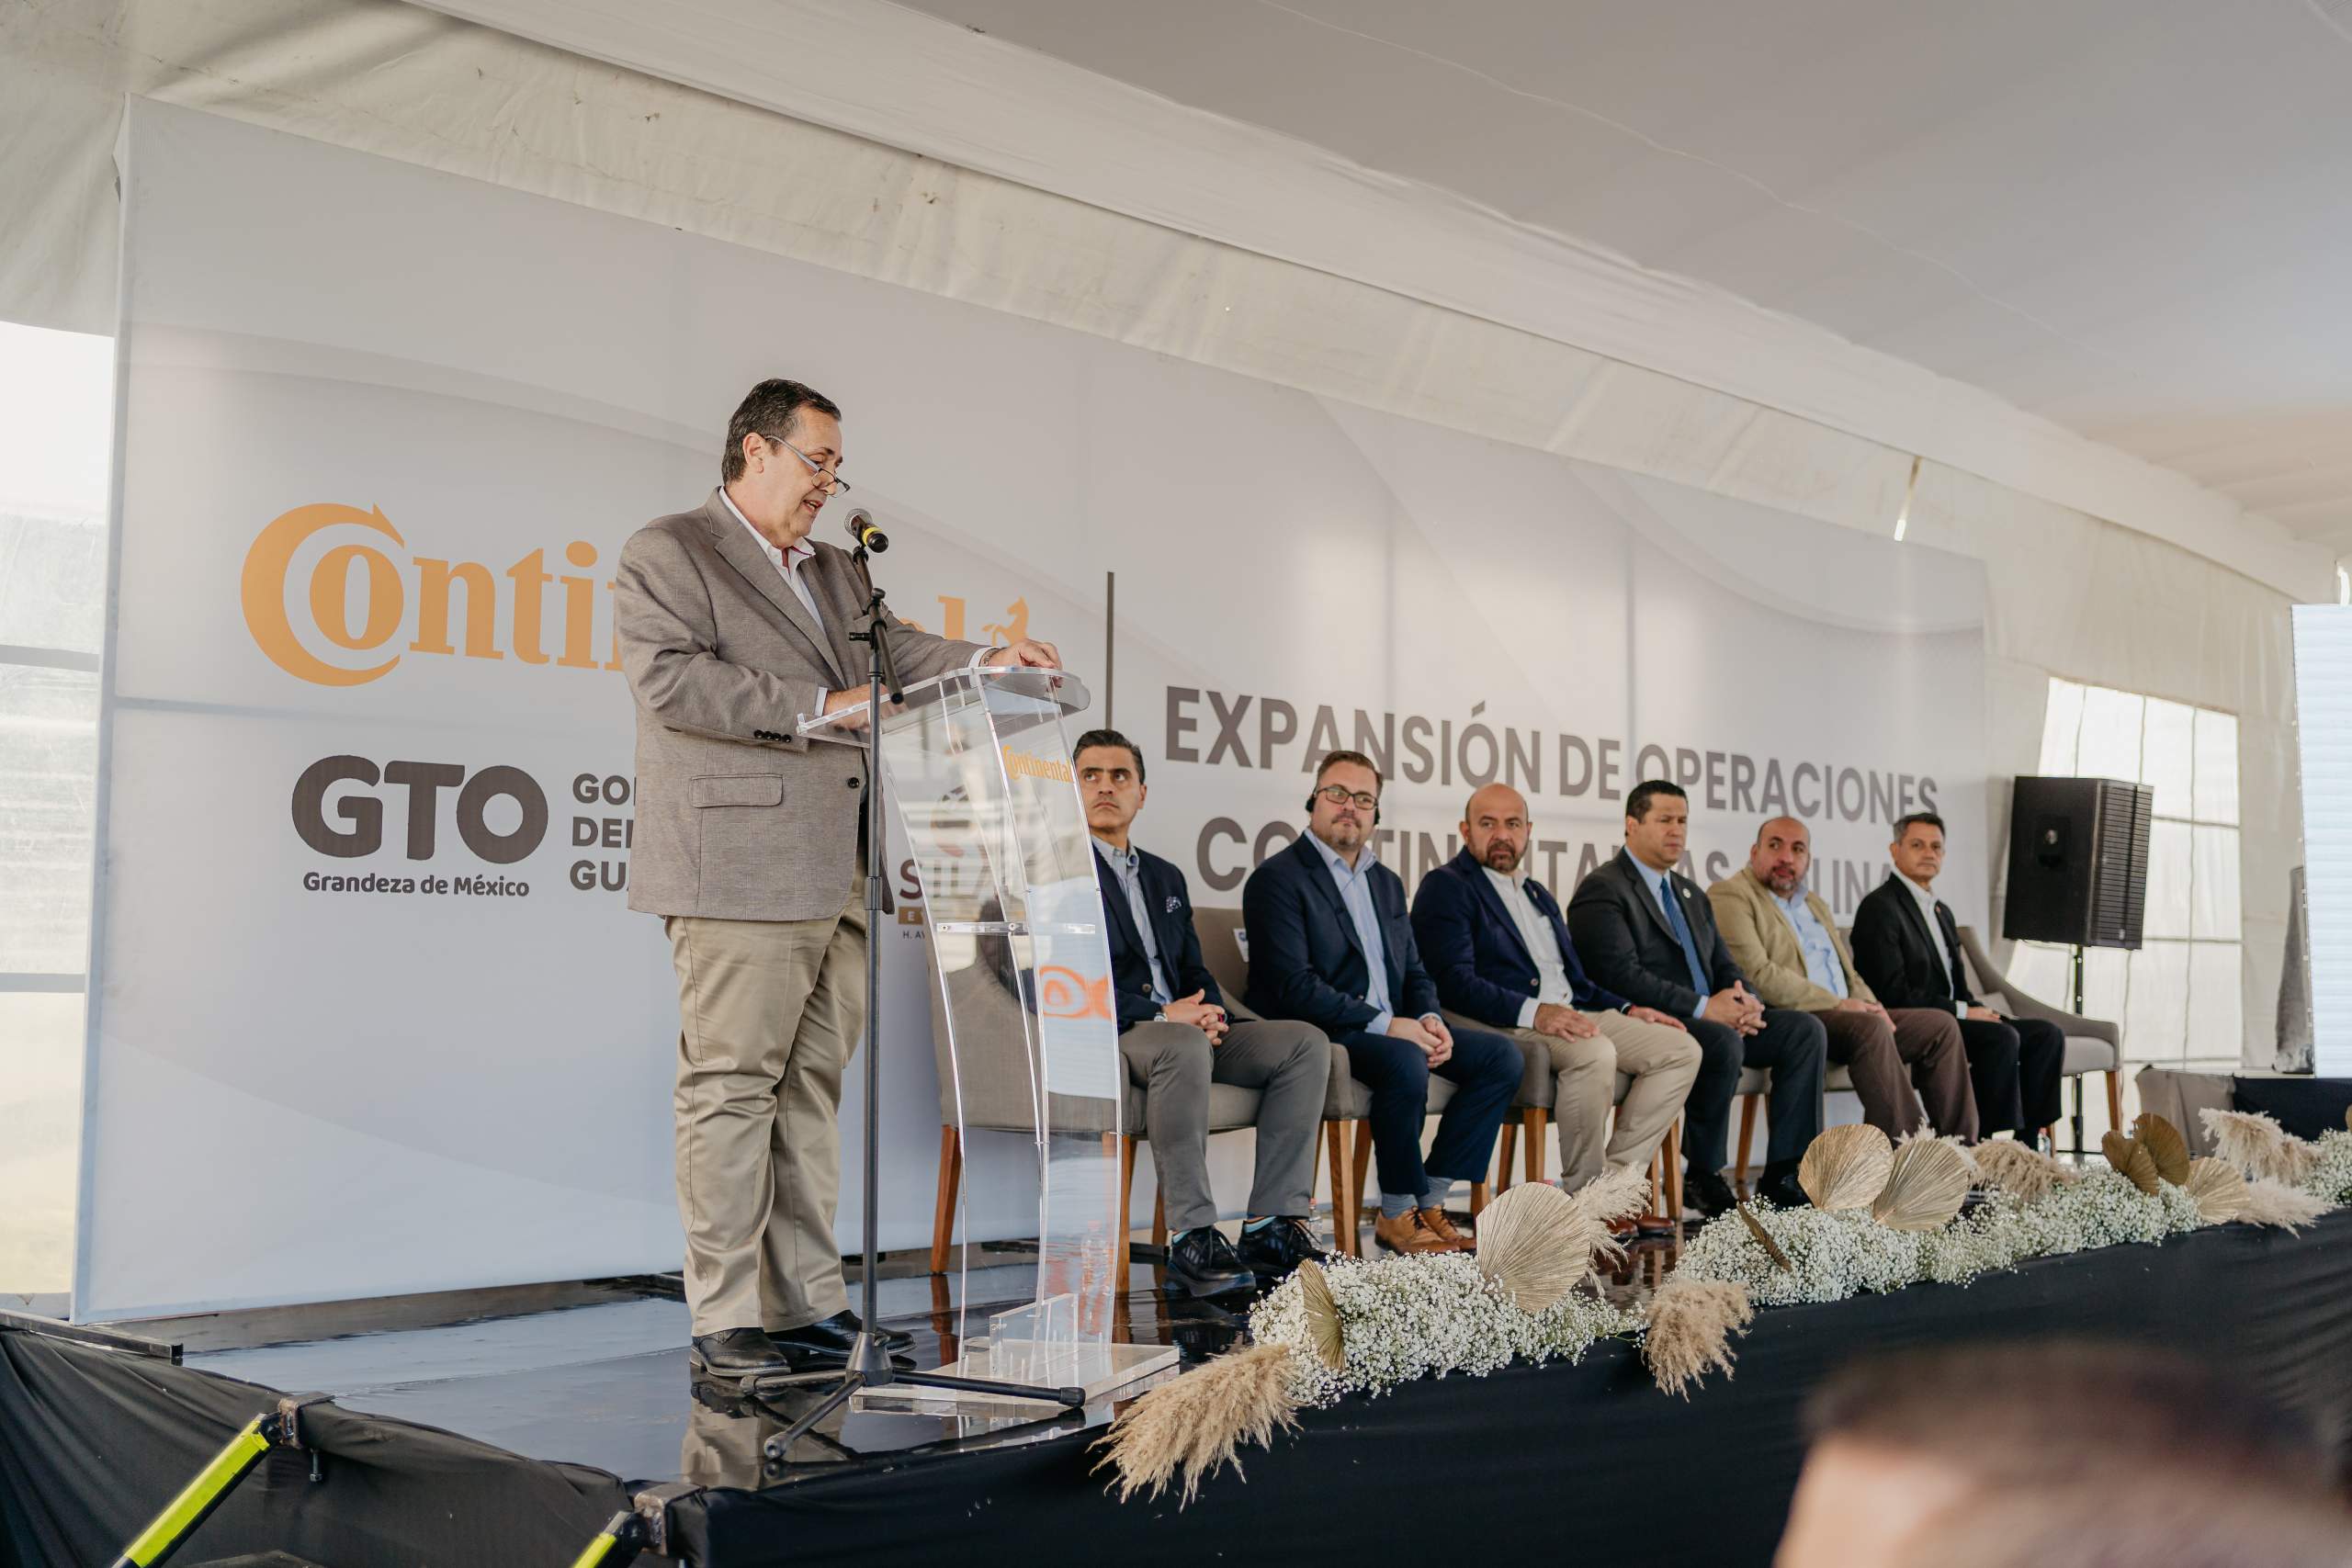 Continental announces expansion project of its operations in Guanajuato